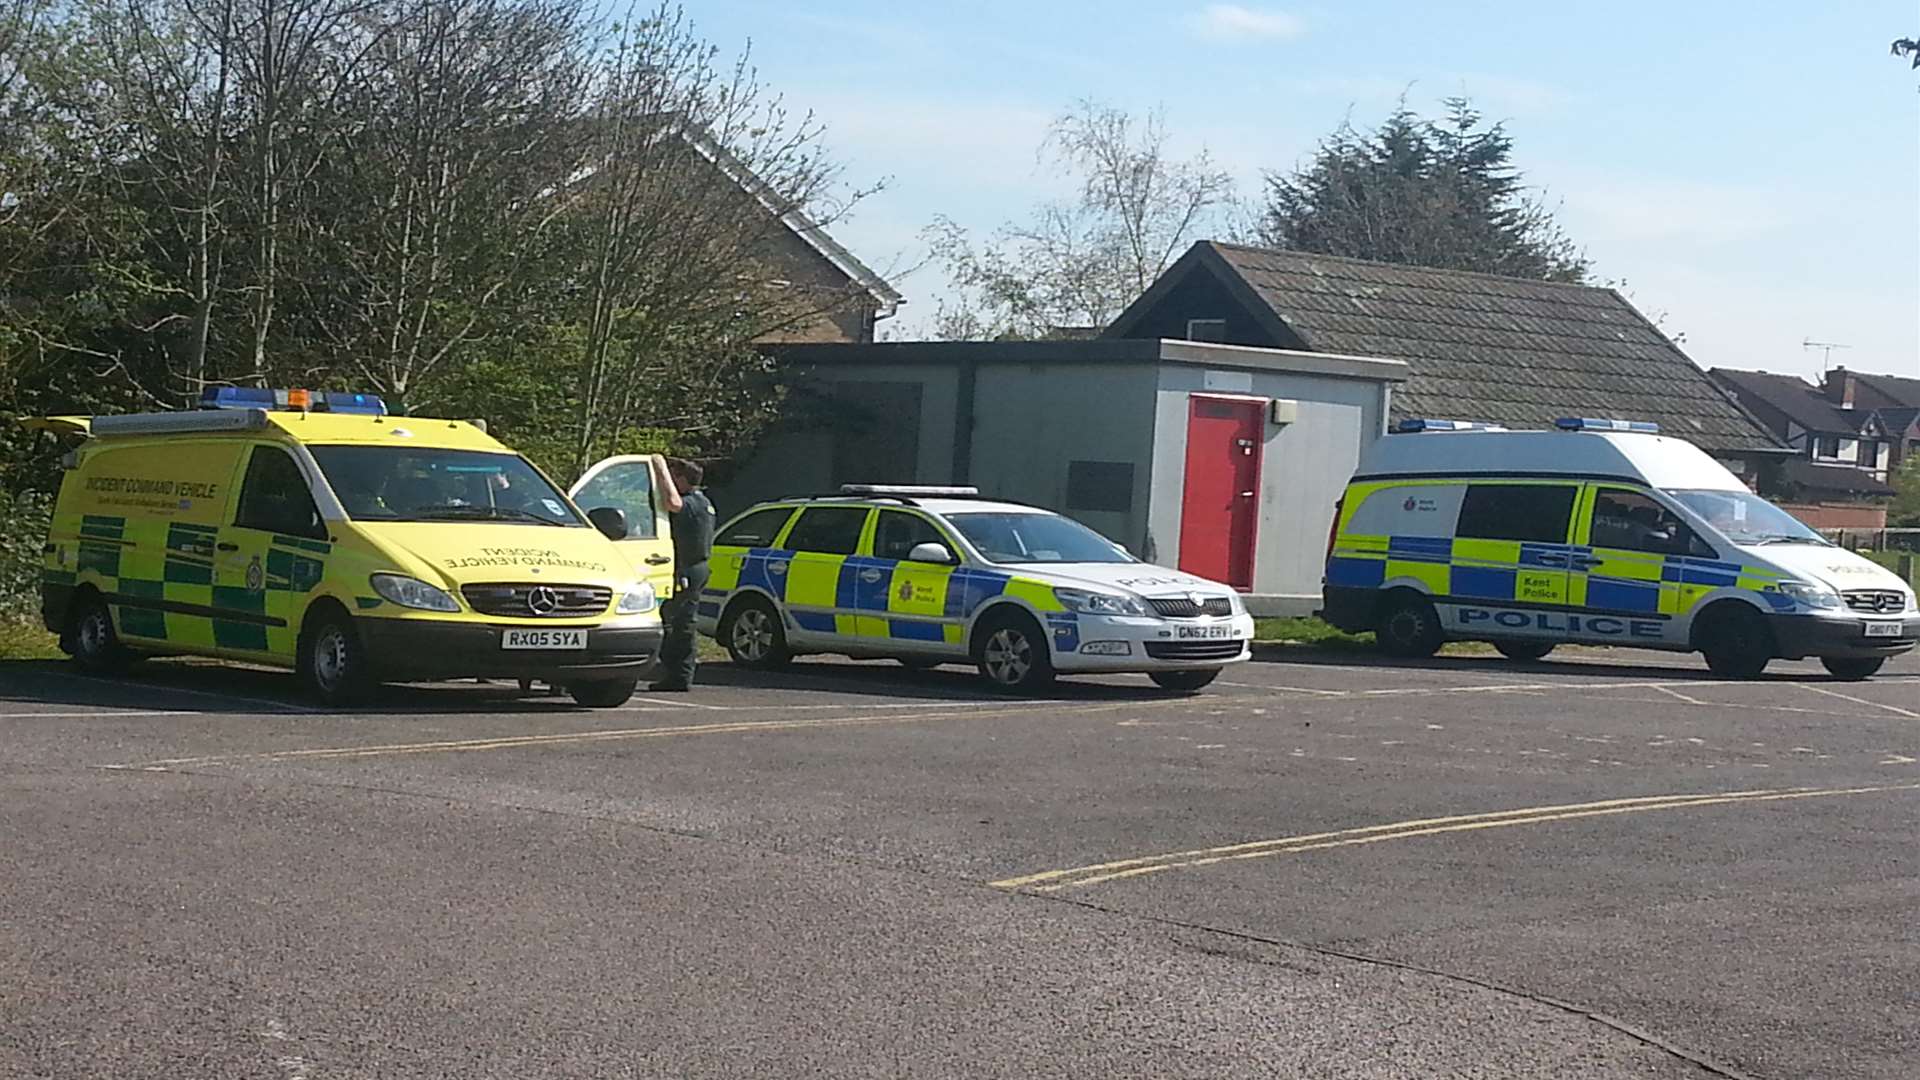 Four police cars, two ambulances and two fire cars were seen in Whitstable Rugby Club’s car park